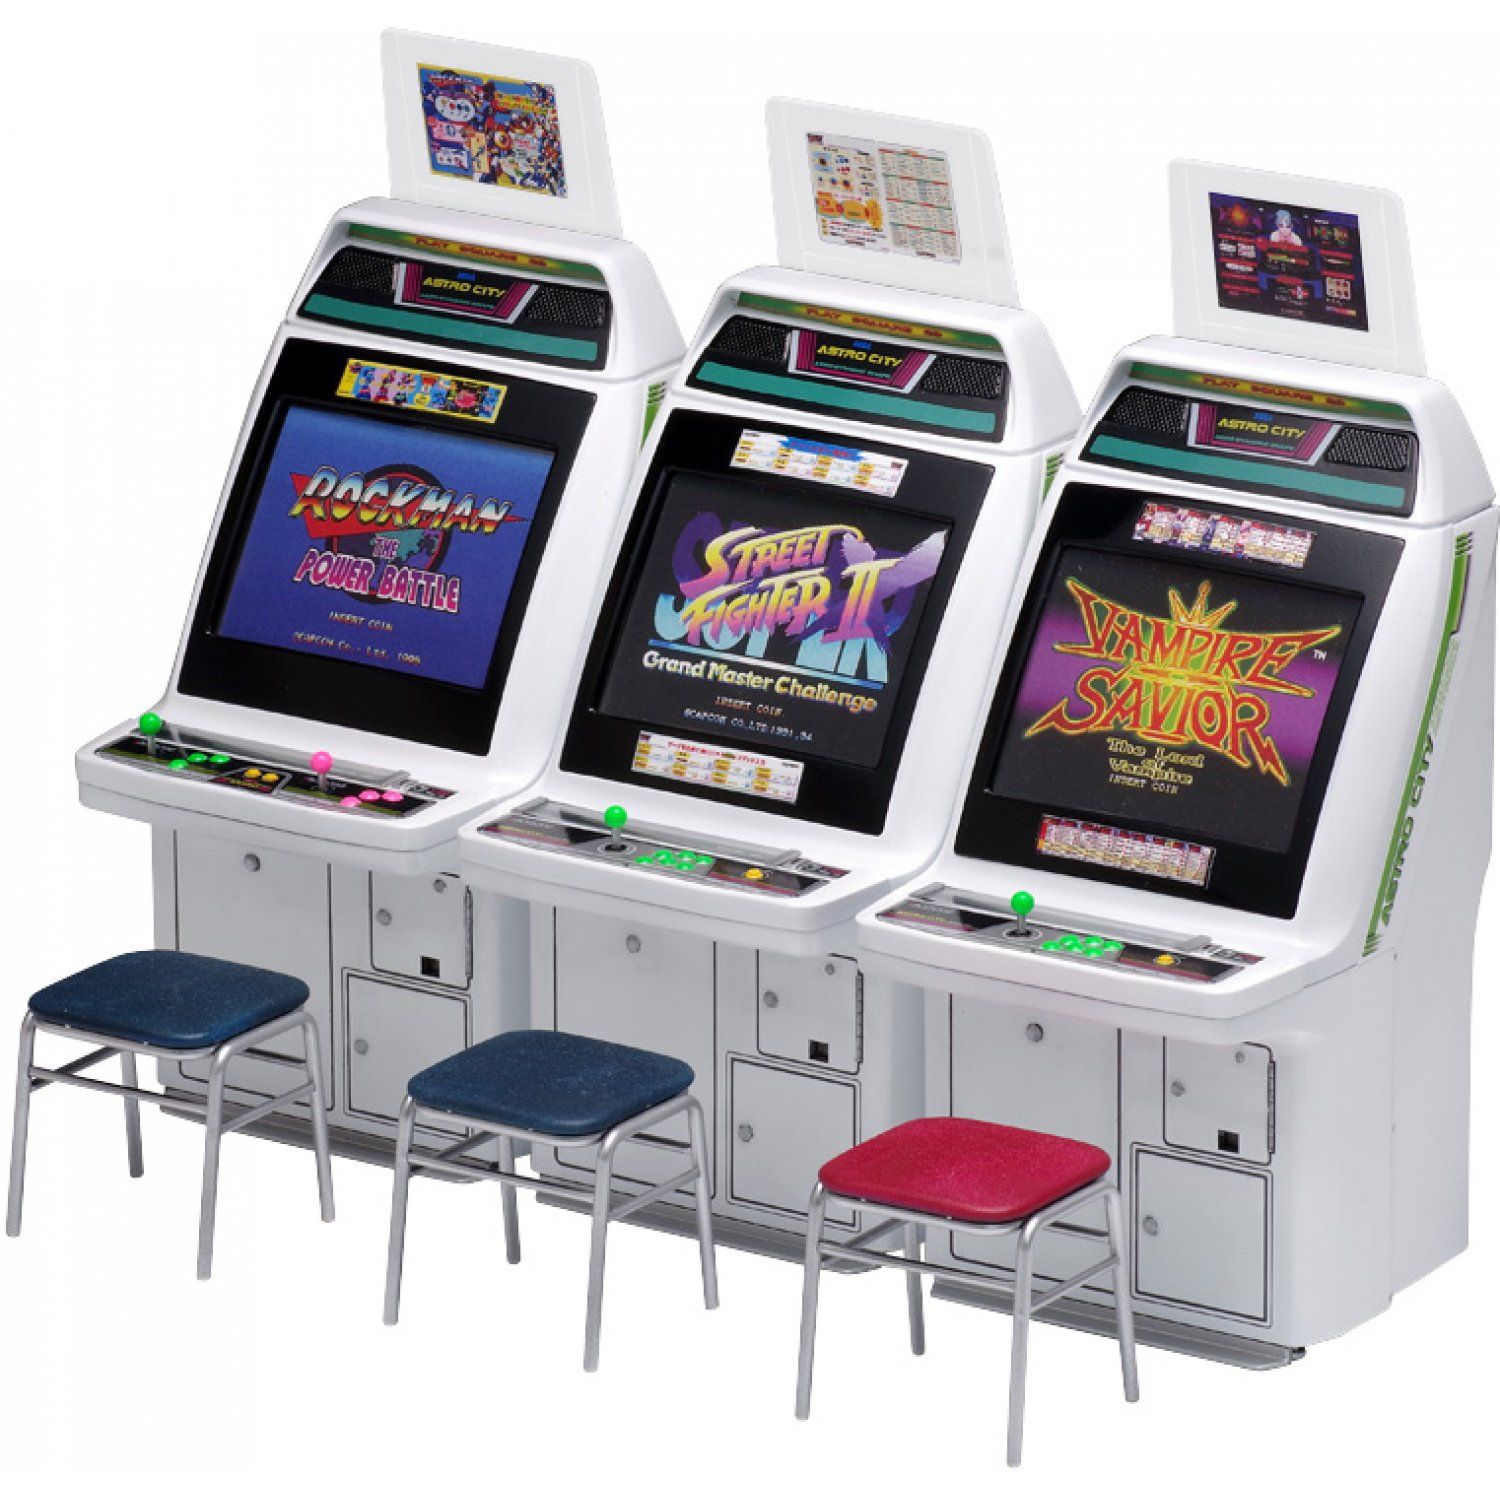 What are Redemption Arcade Game Machines?